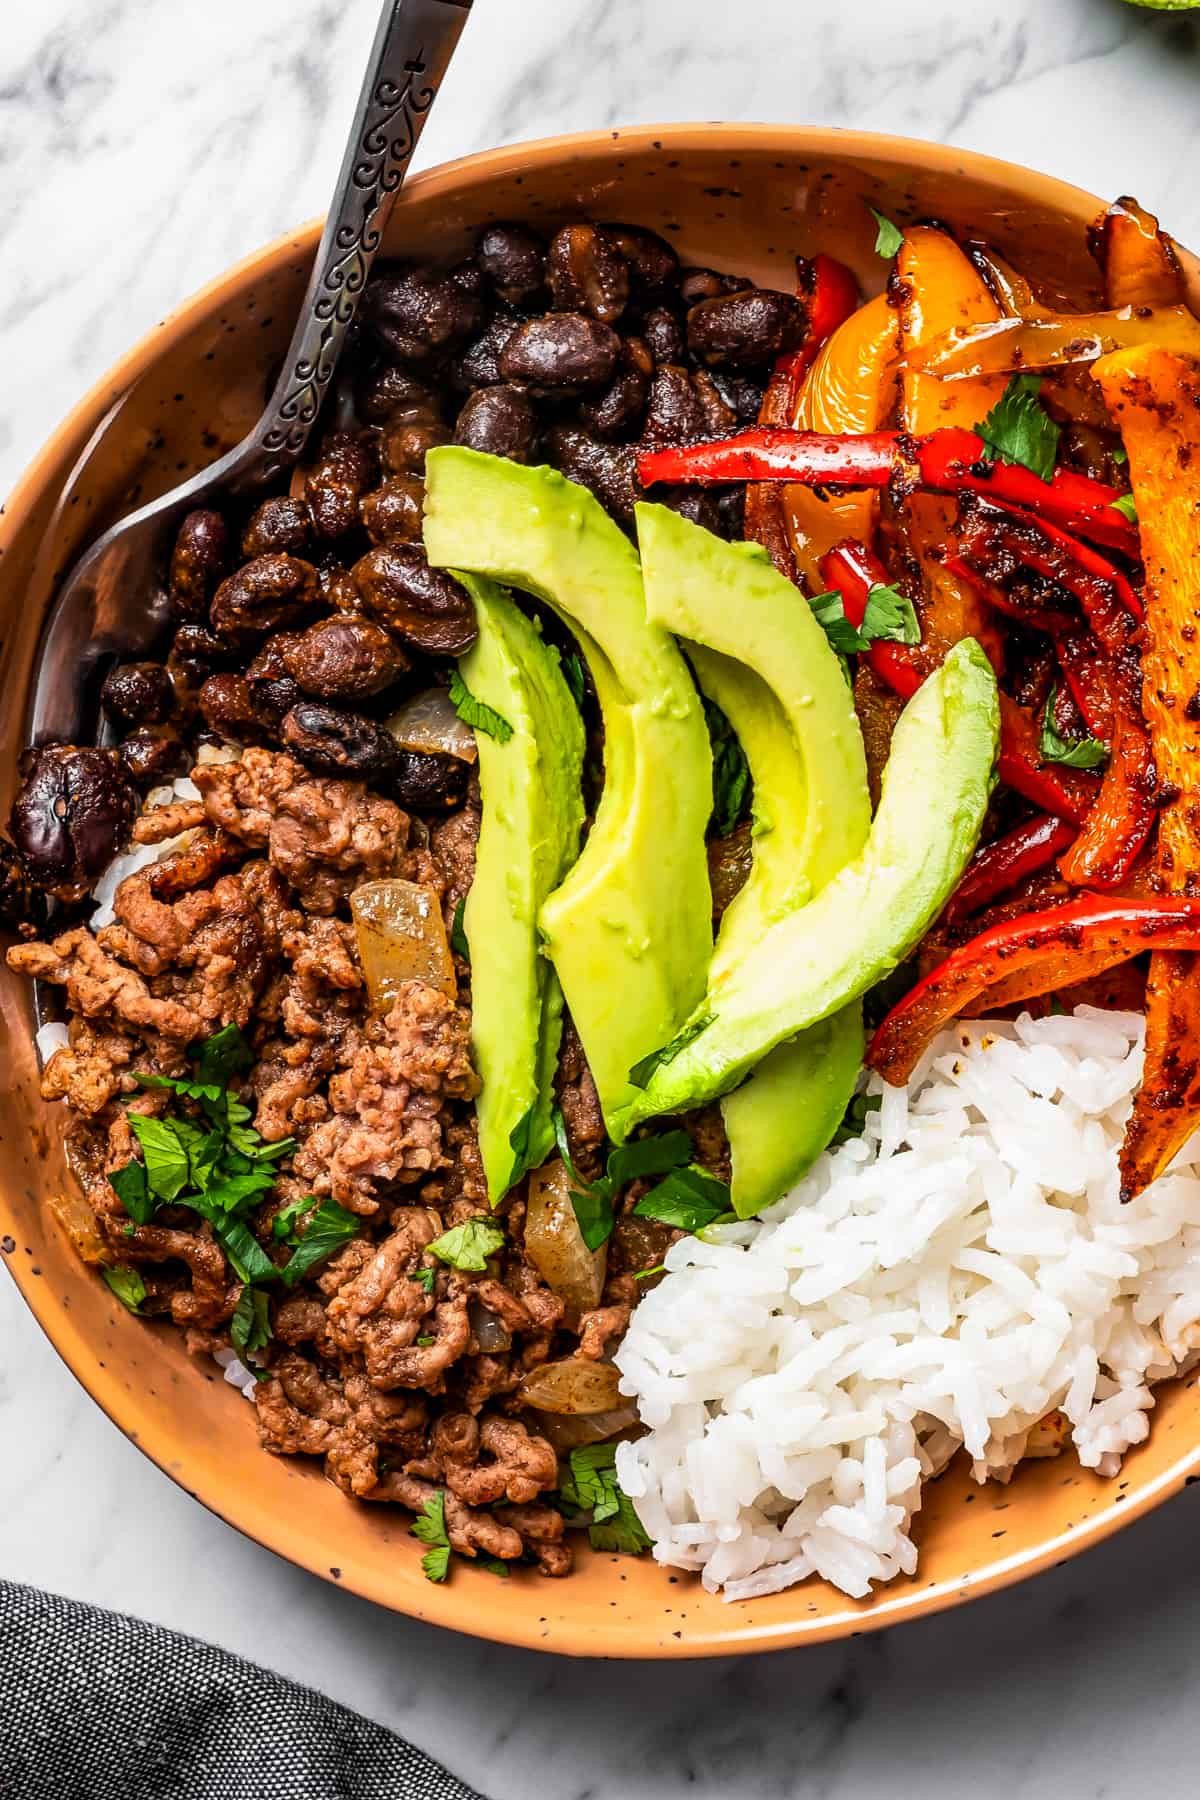 Closeup of a bowl with taco meat, sliced bell peppers, avocado slices, beans, and rice.